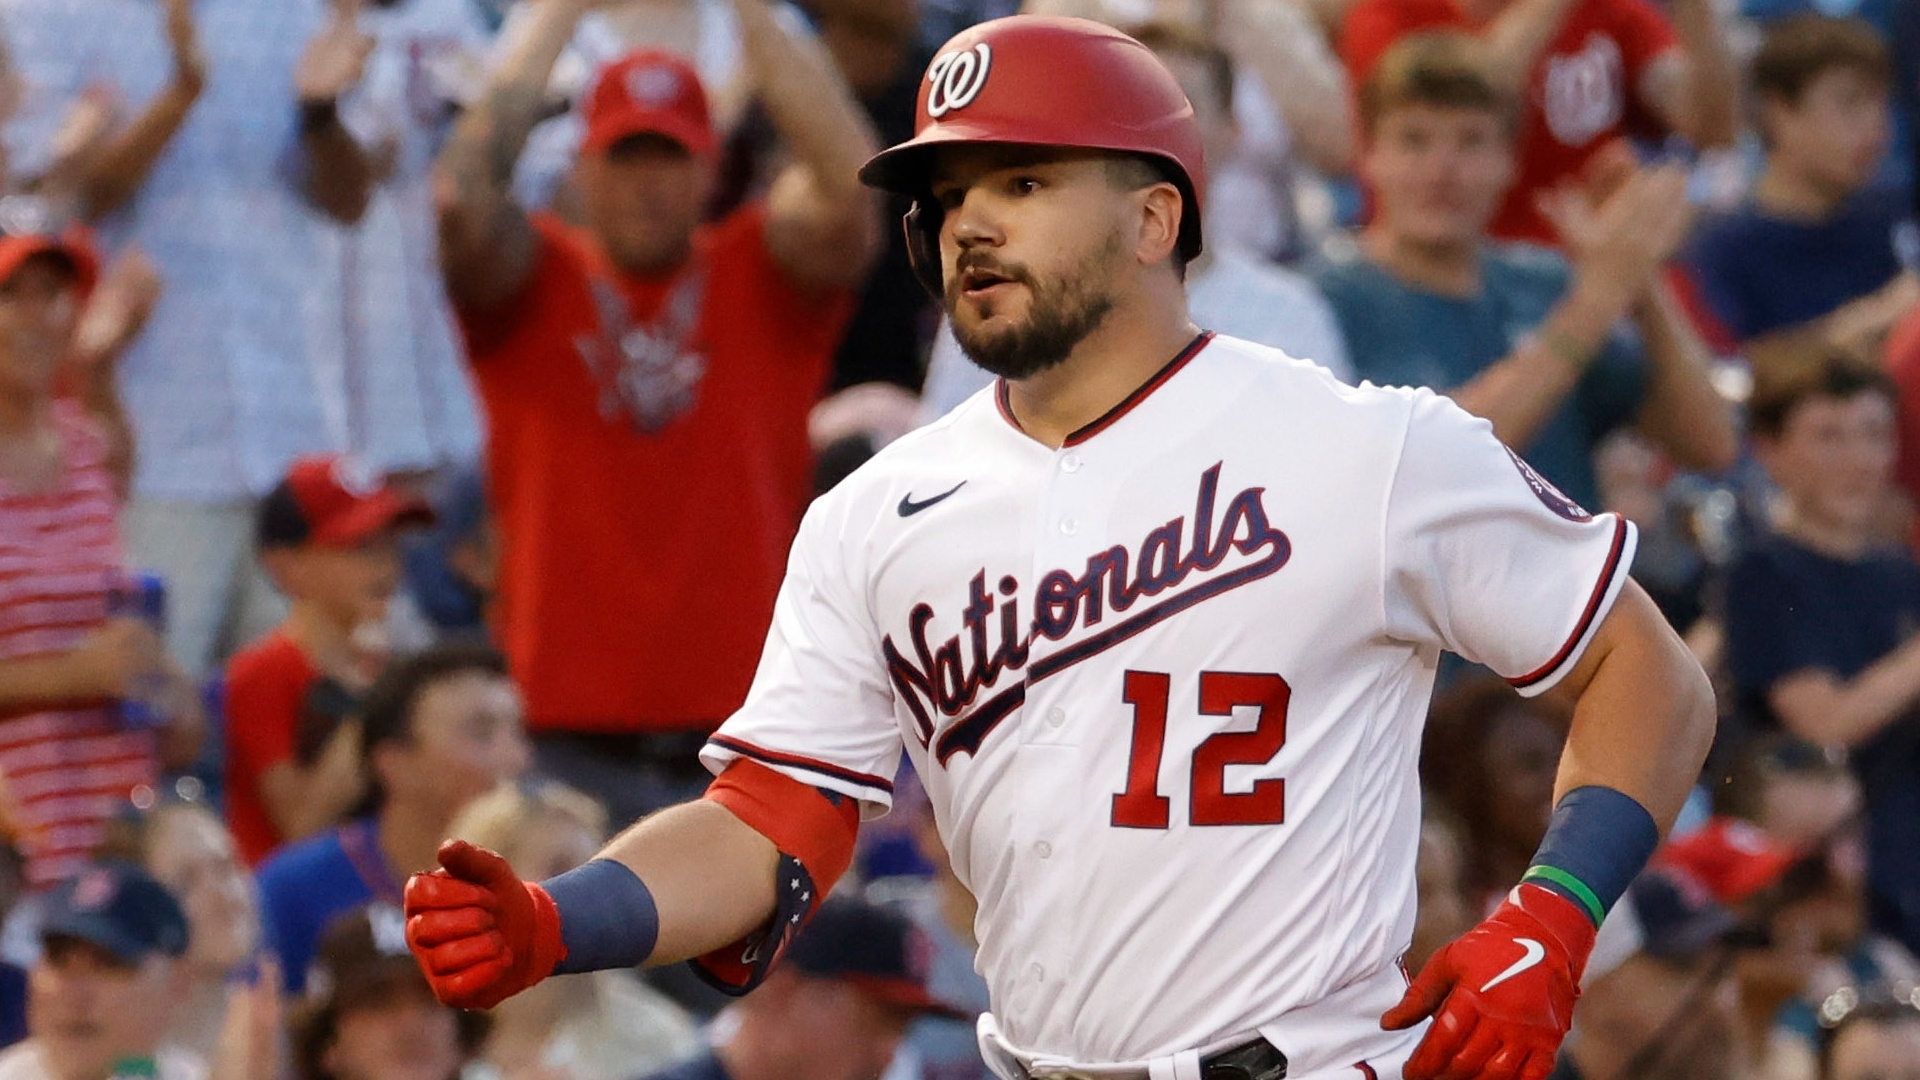 Nationals’ Kyle Schwarber wins NL Player of the Month after surreal